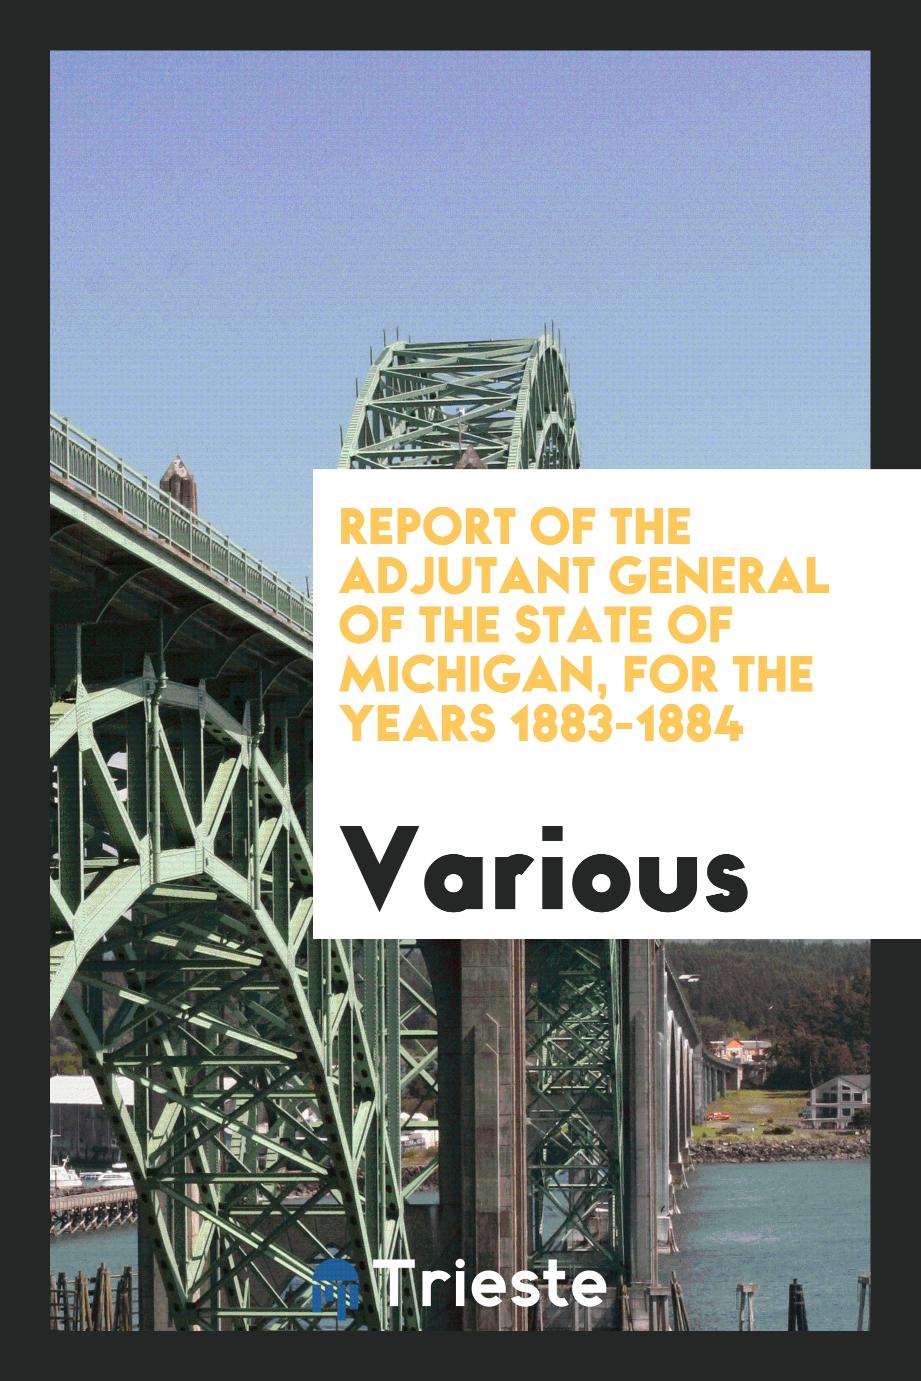 Report of the Adjutant General of the State of Michigan, for the Years 1883-1884